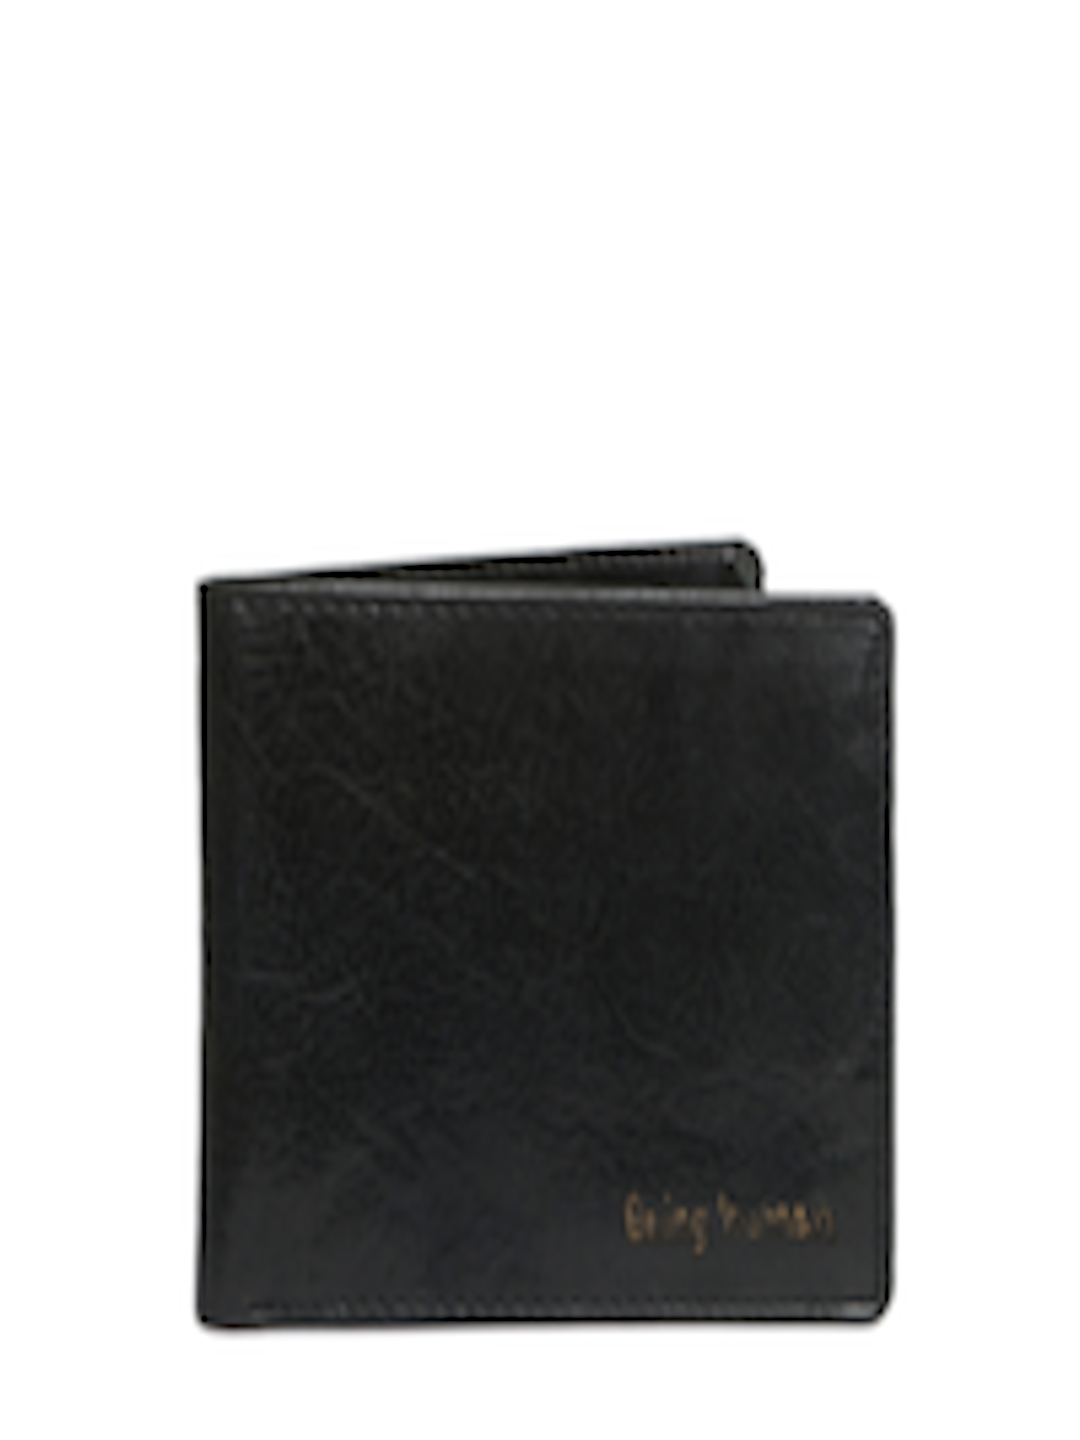 Buy Being Human Clothing Unisex Black Leather Wallet - Wallets for ...